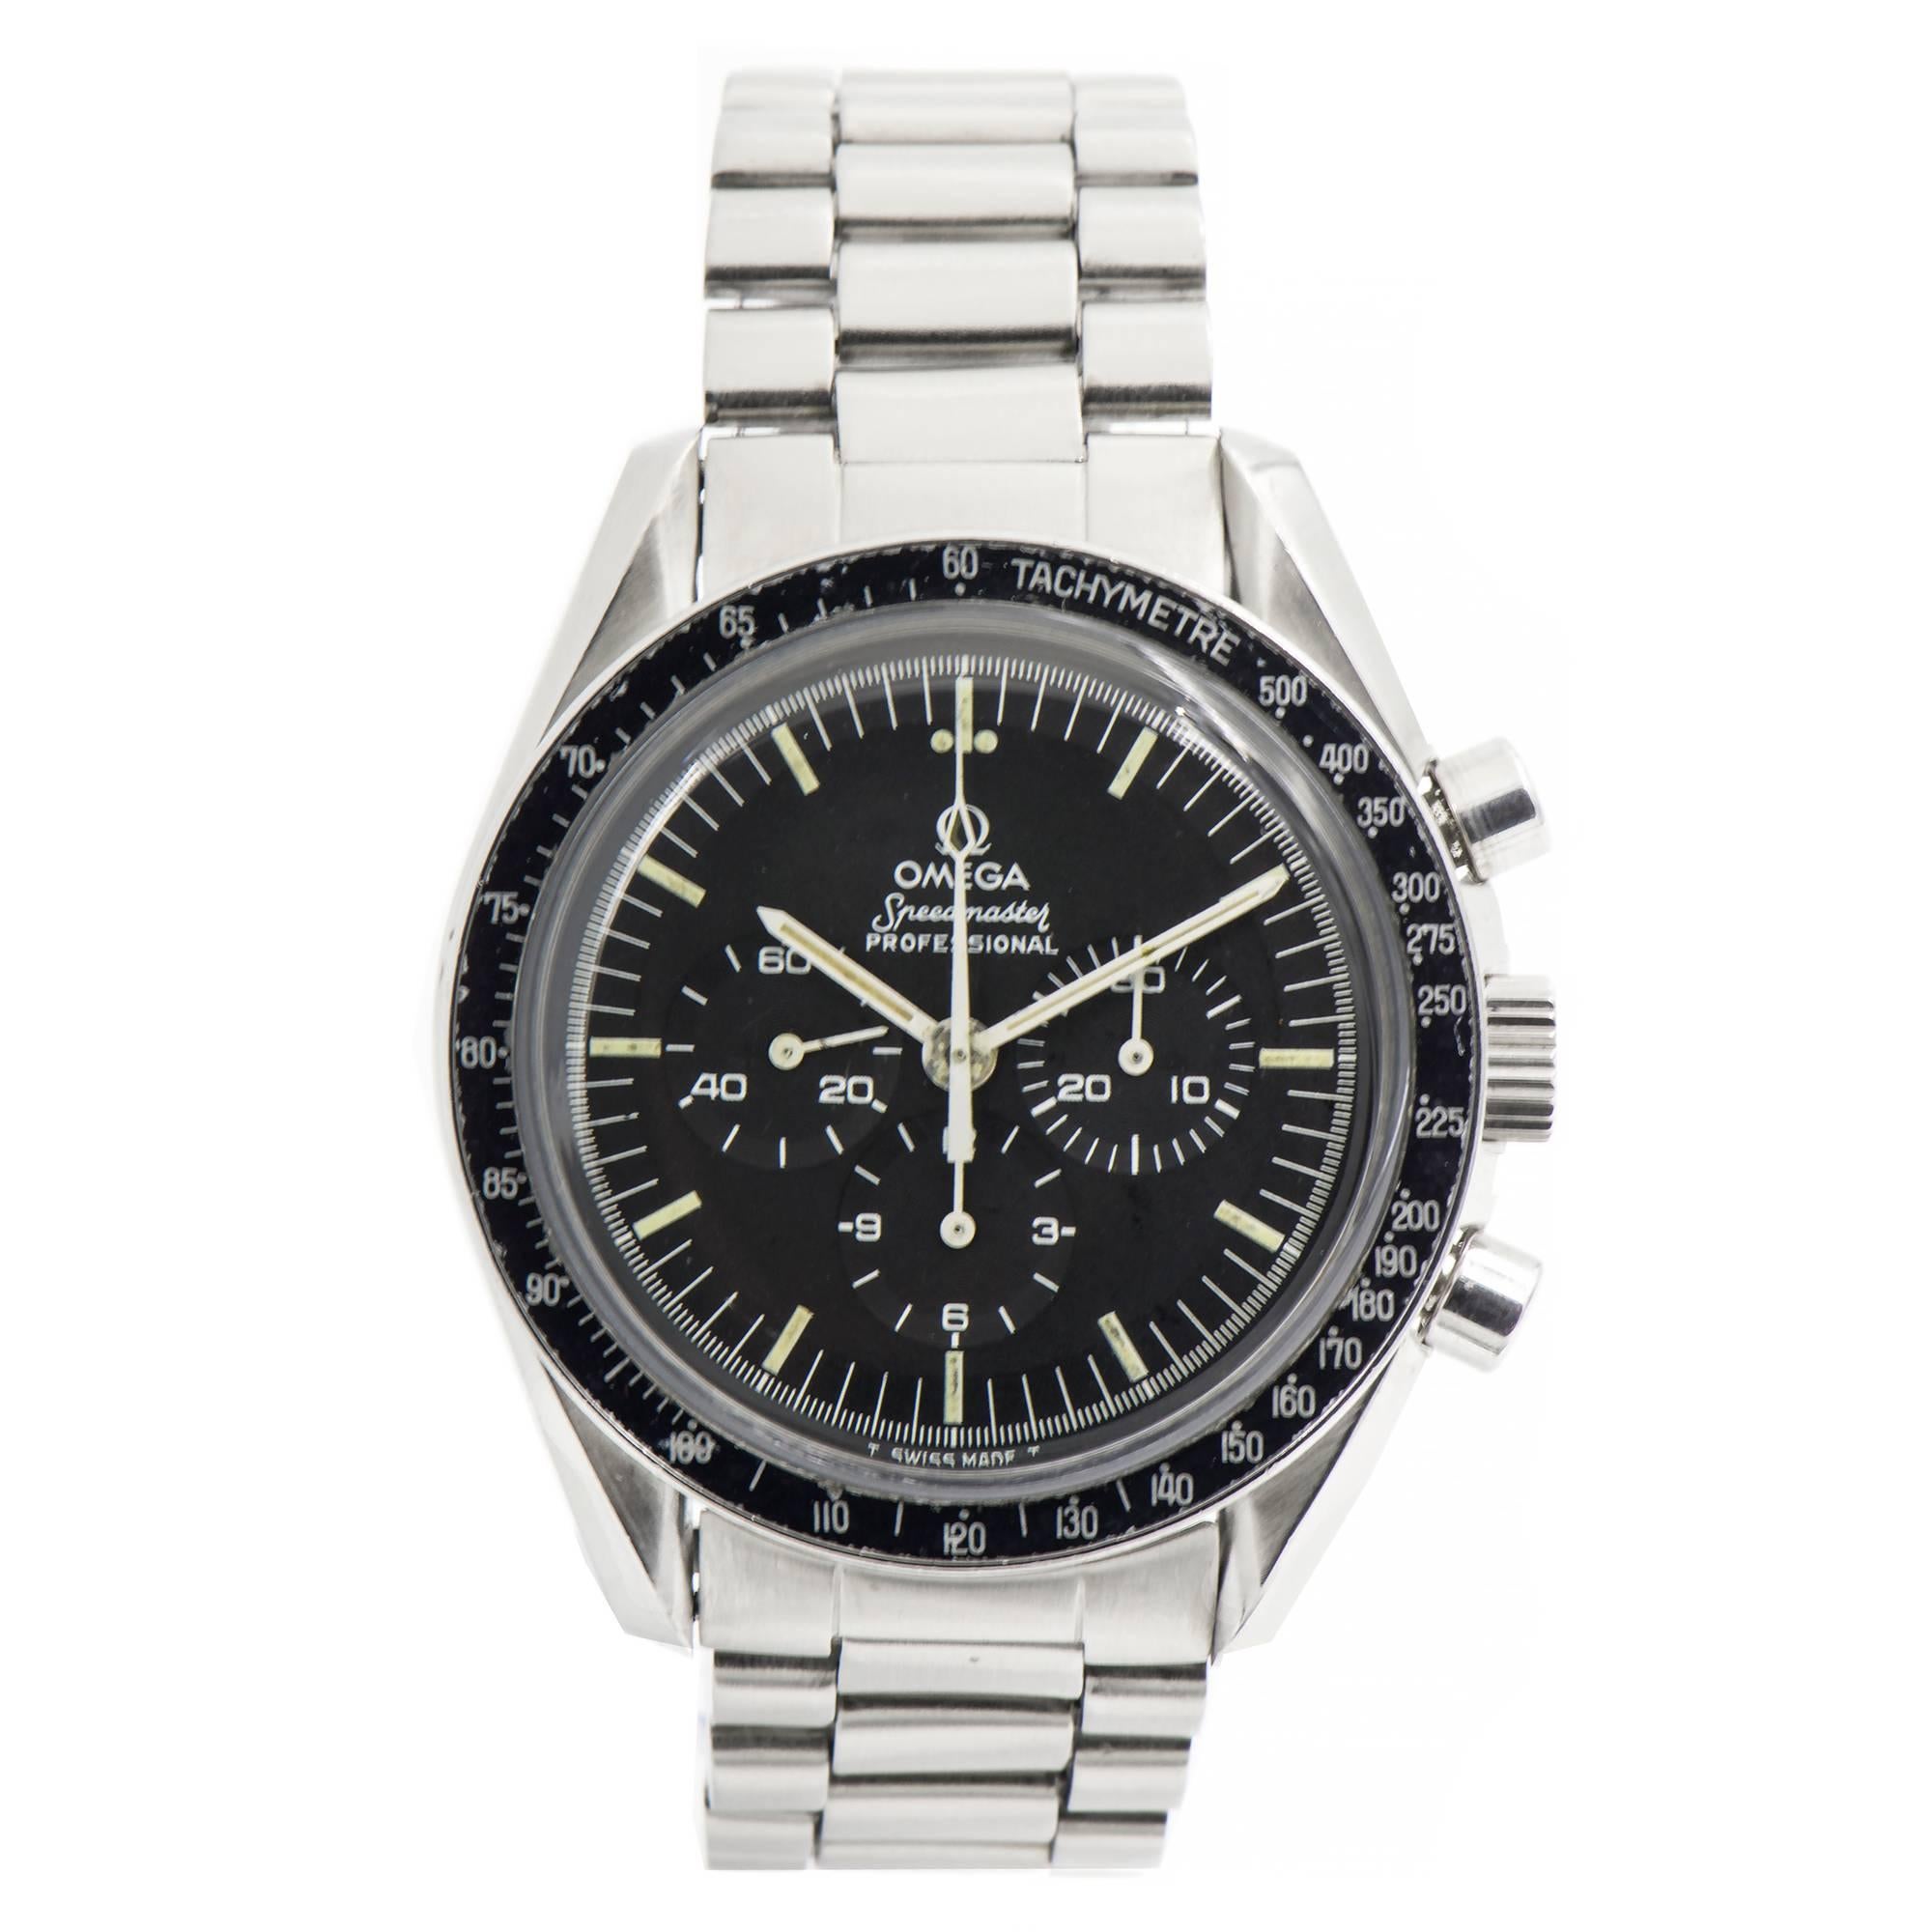 Omega stainless steel Speedmaster Chronograph 145.022 78 Moonwatch with Original case, band ,bezel, rim, dial and hands. 

Stainless steel 
Length lug top to bottom 47.5mm 
42mm case diameter 
Original matte black Omega Dial 
861 17 jewel movement,